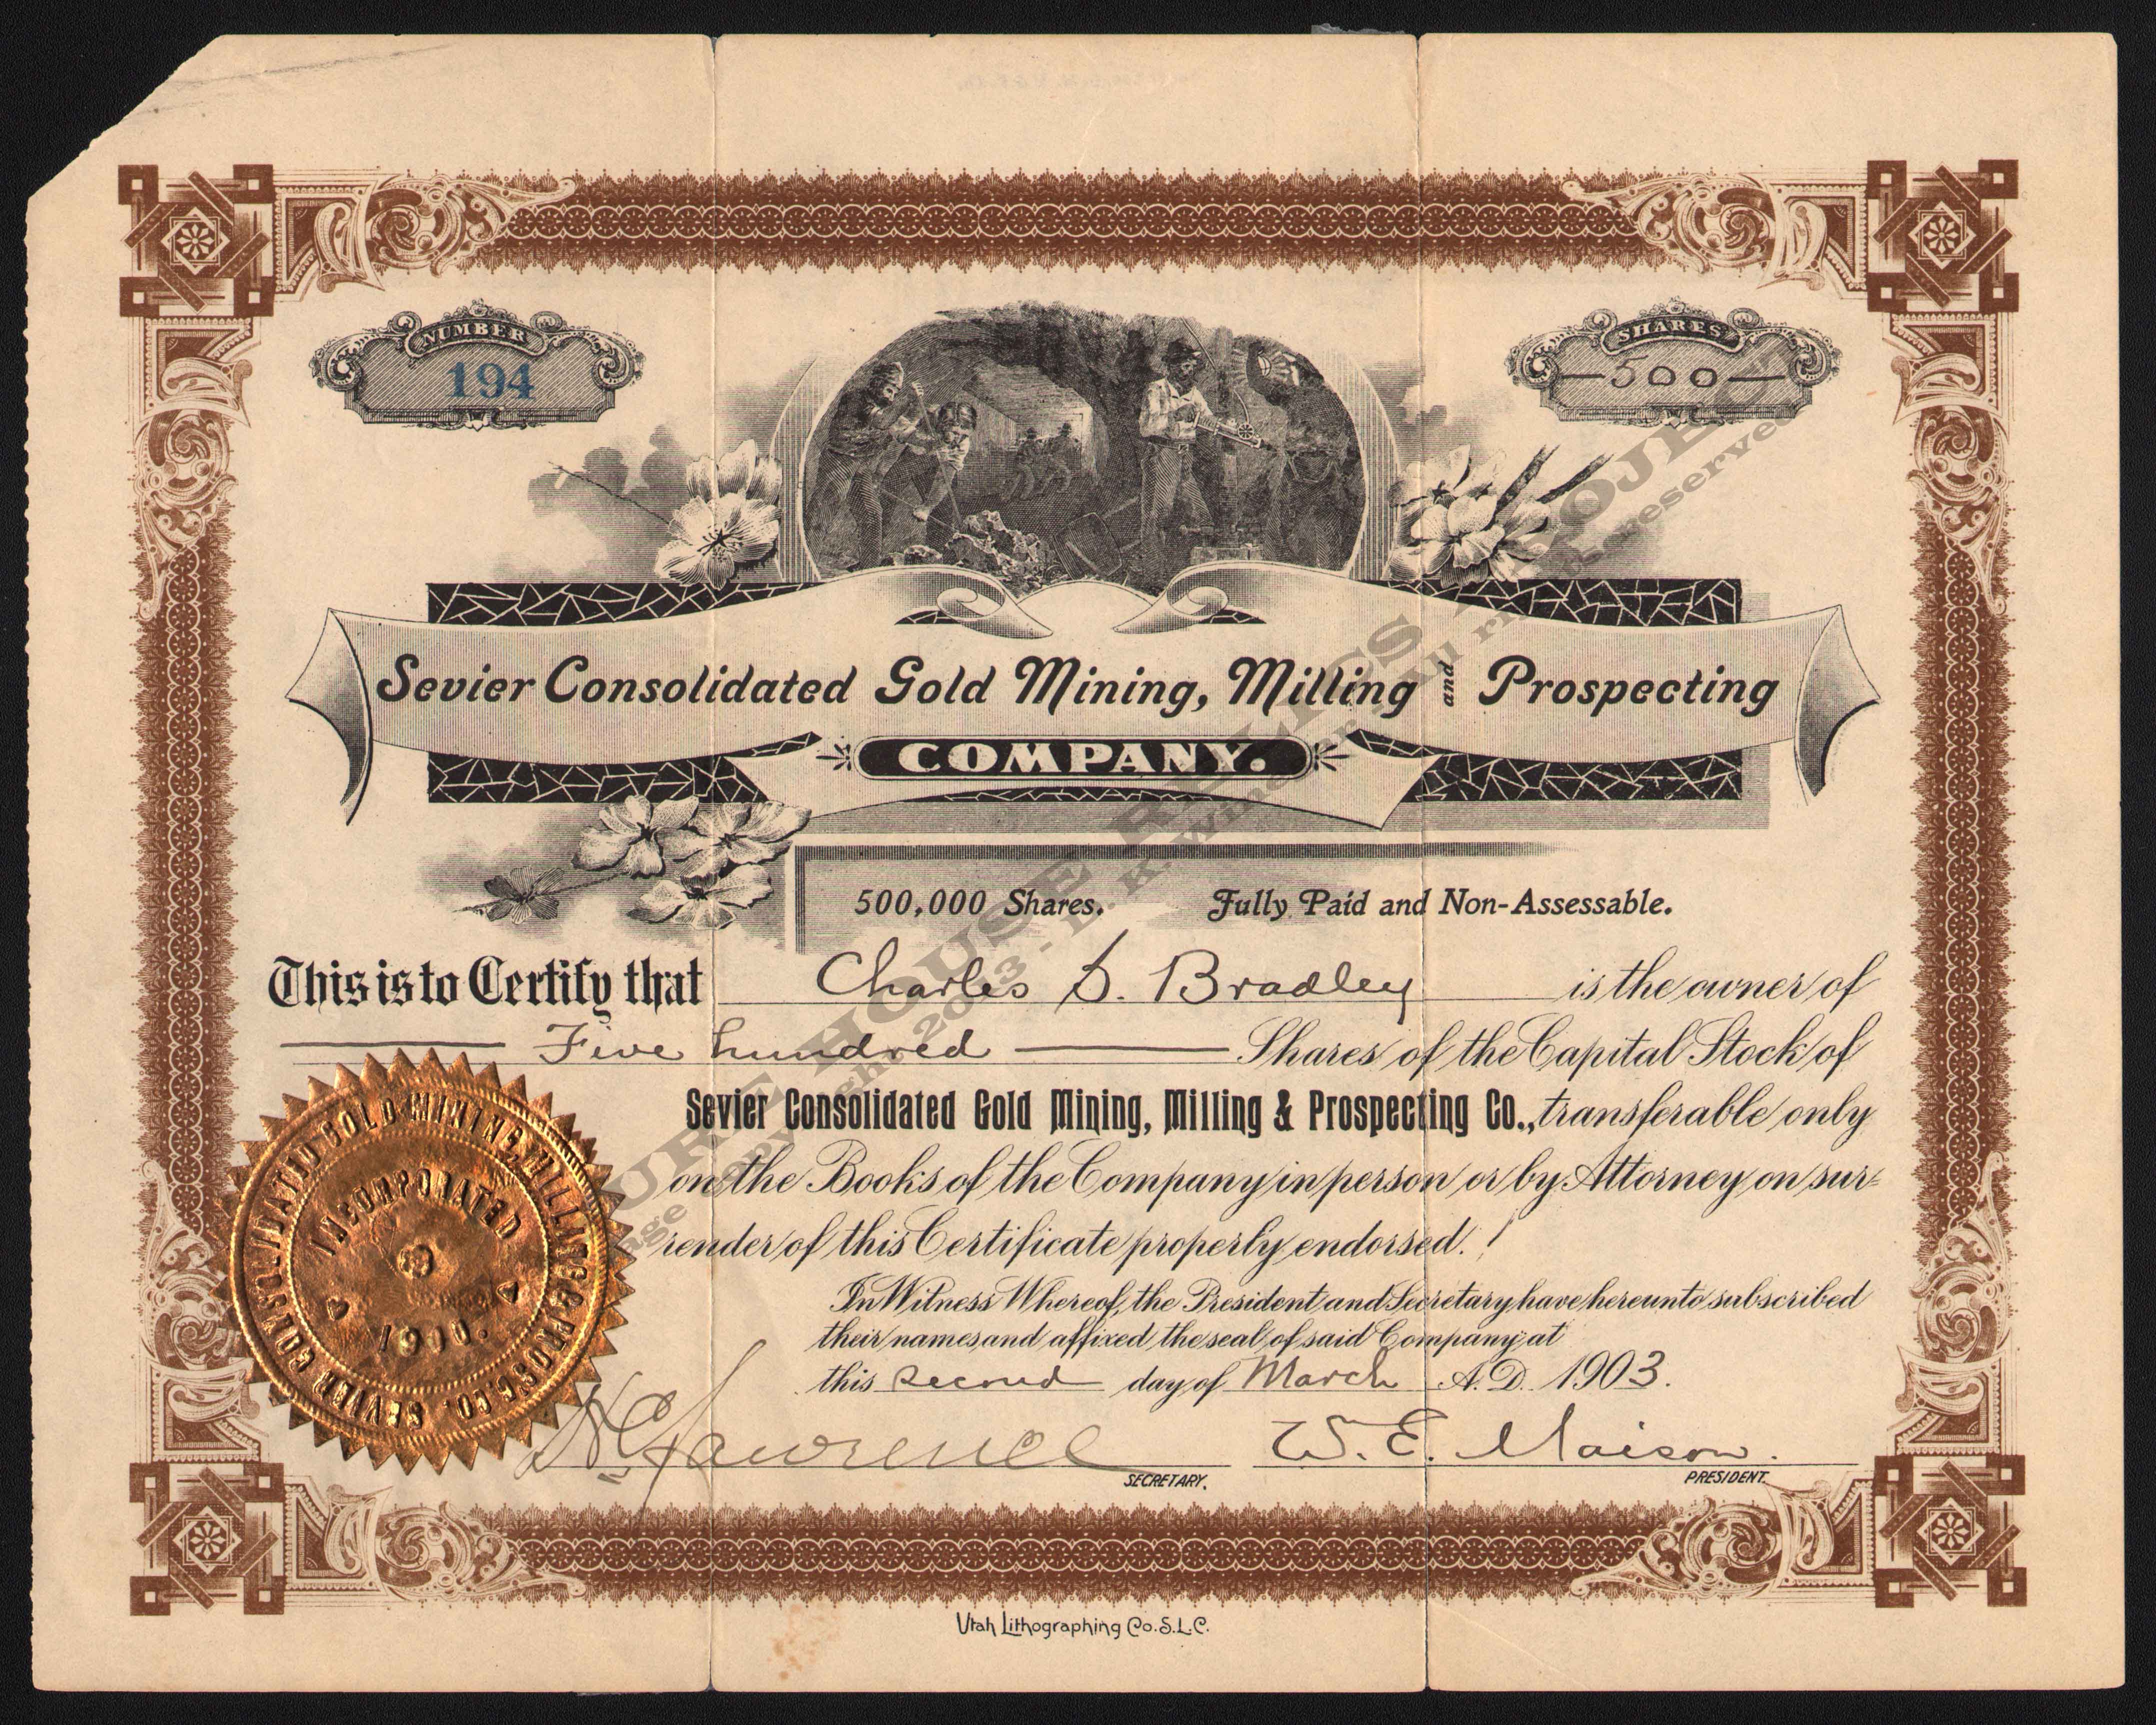 LETTERHEAD/SEVIER_CONSOLIDATED_GOLD_MINING_MILLING_PROSPECTING_COMPANY_543_1904_GP_400_CROP_EMBOSS.jpg